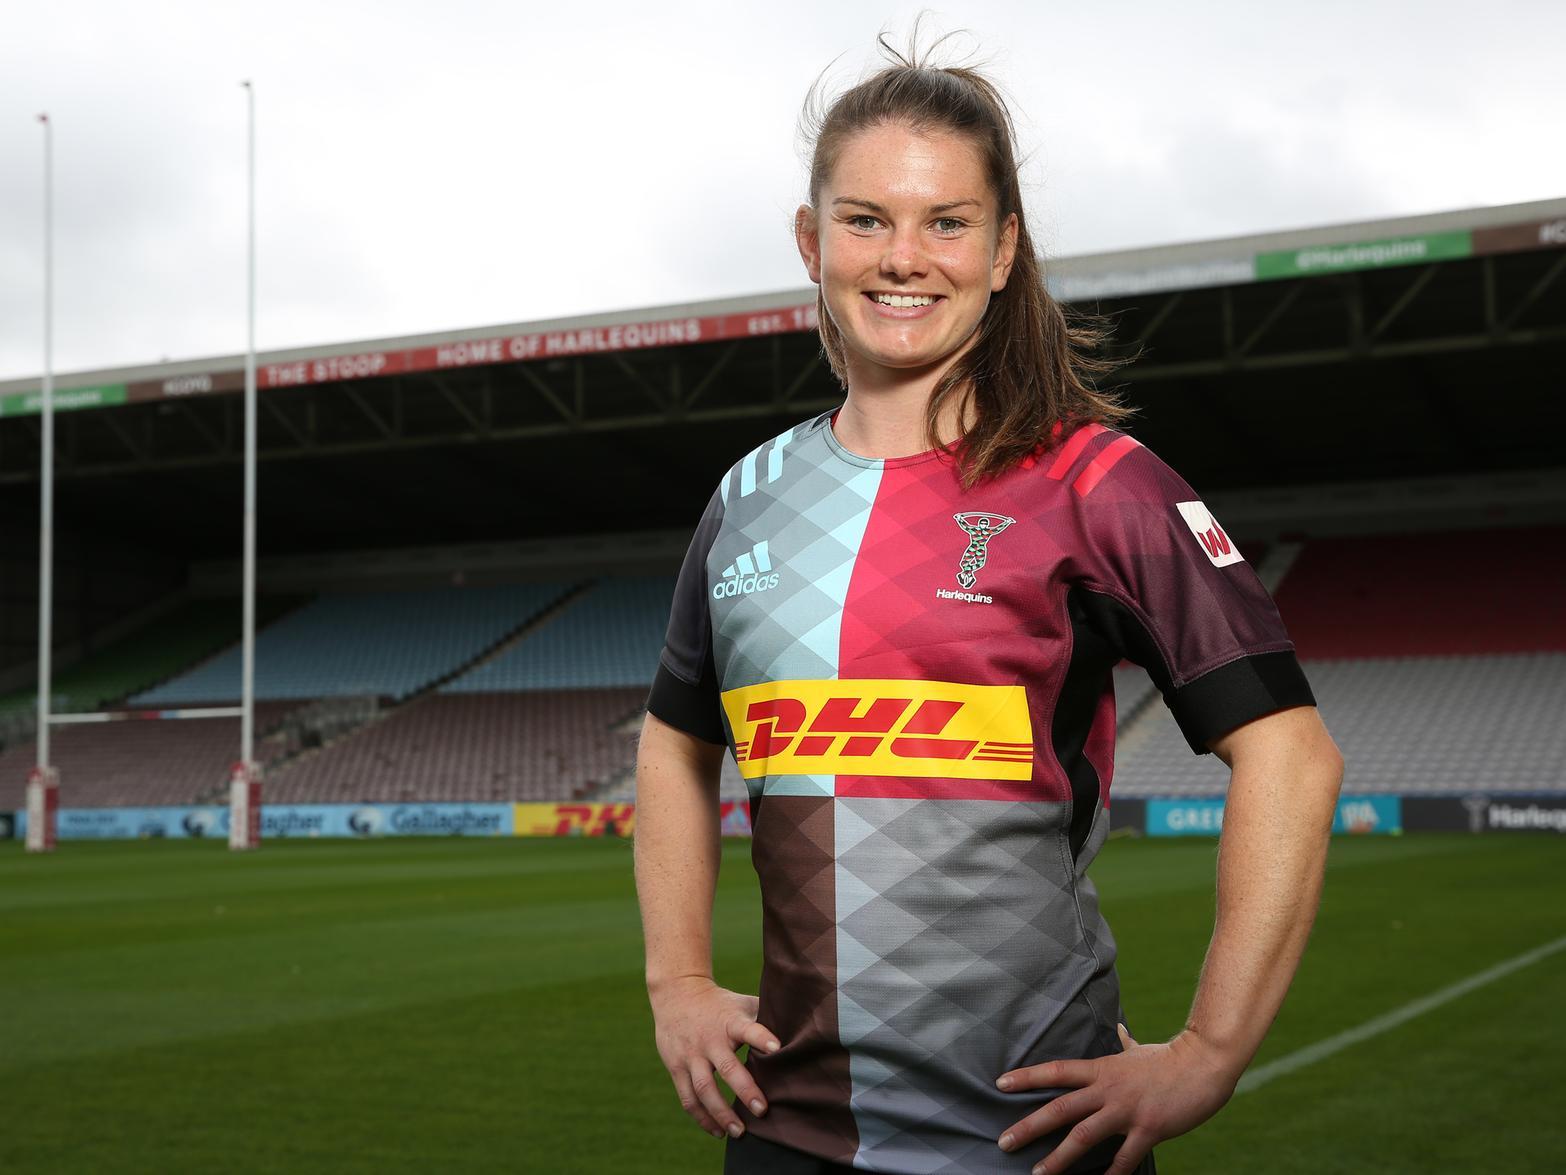 Chichesters Jess is an England womens national rugby union team international who also plays for Harlequins. A former sprint hurdler at the English Schools Athletics Championships, she started playing at the age of six at Chichester RFC.